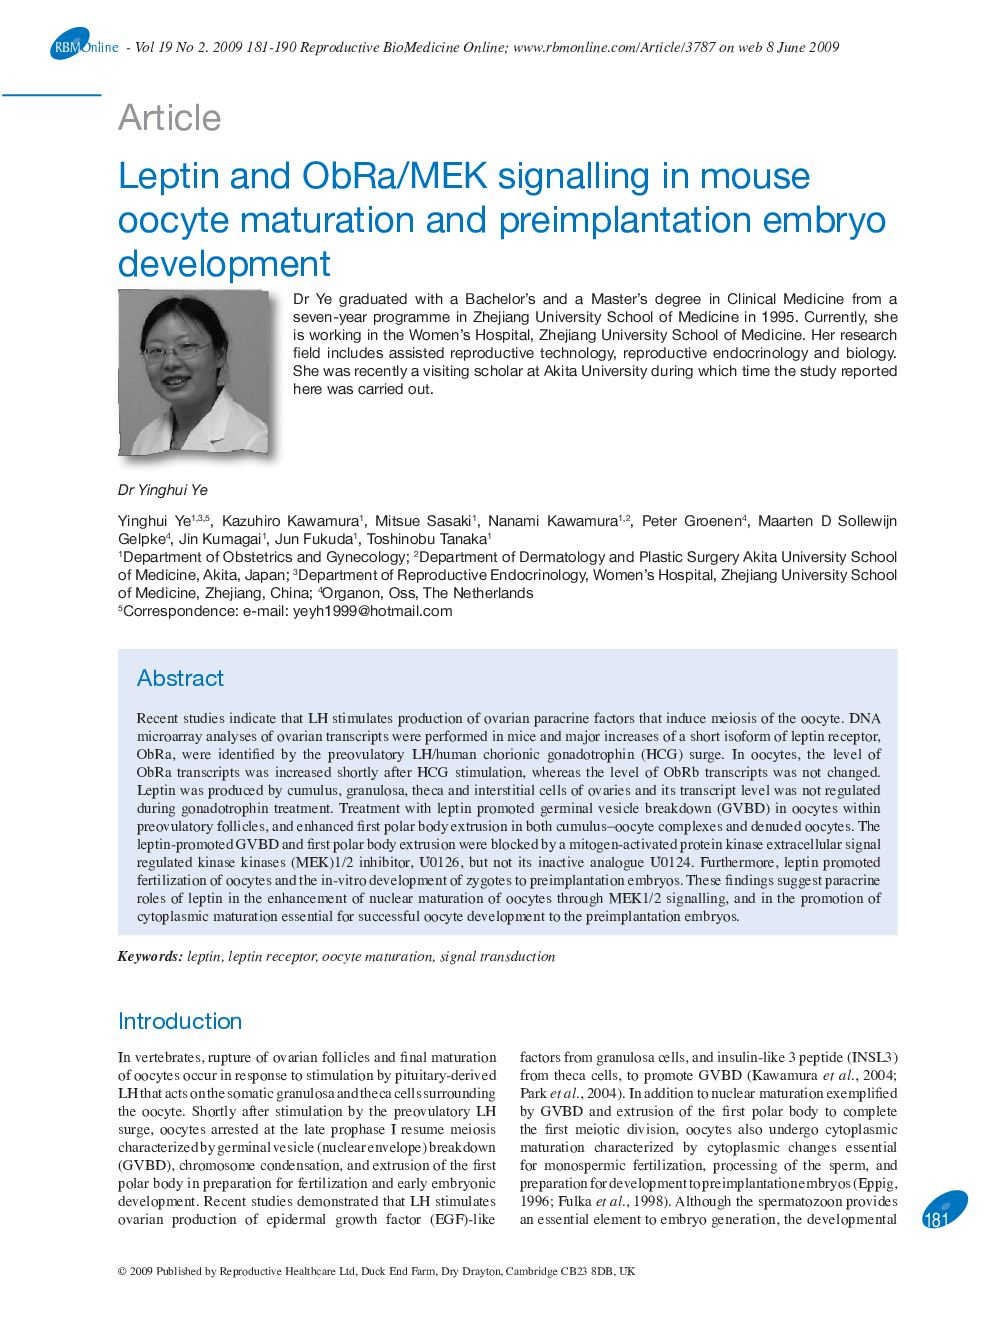 Leptin and ObRa/MEK signalling in mouse oocyte maturation and preimplantation embryo development 